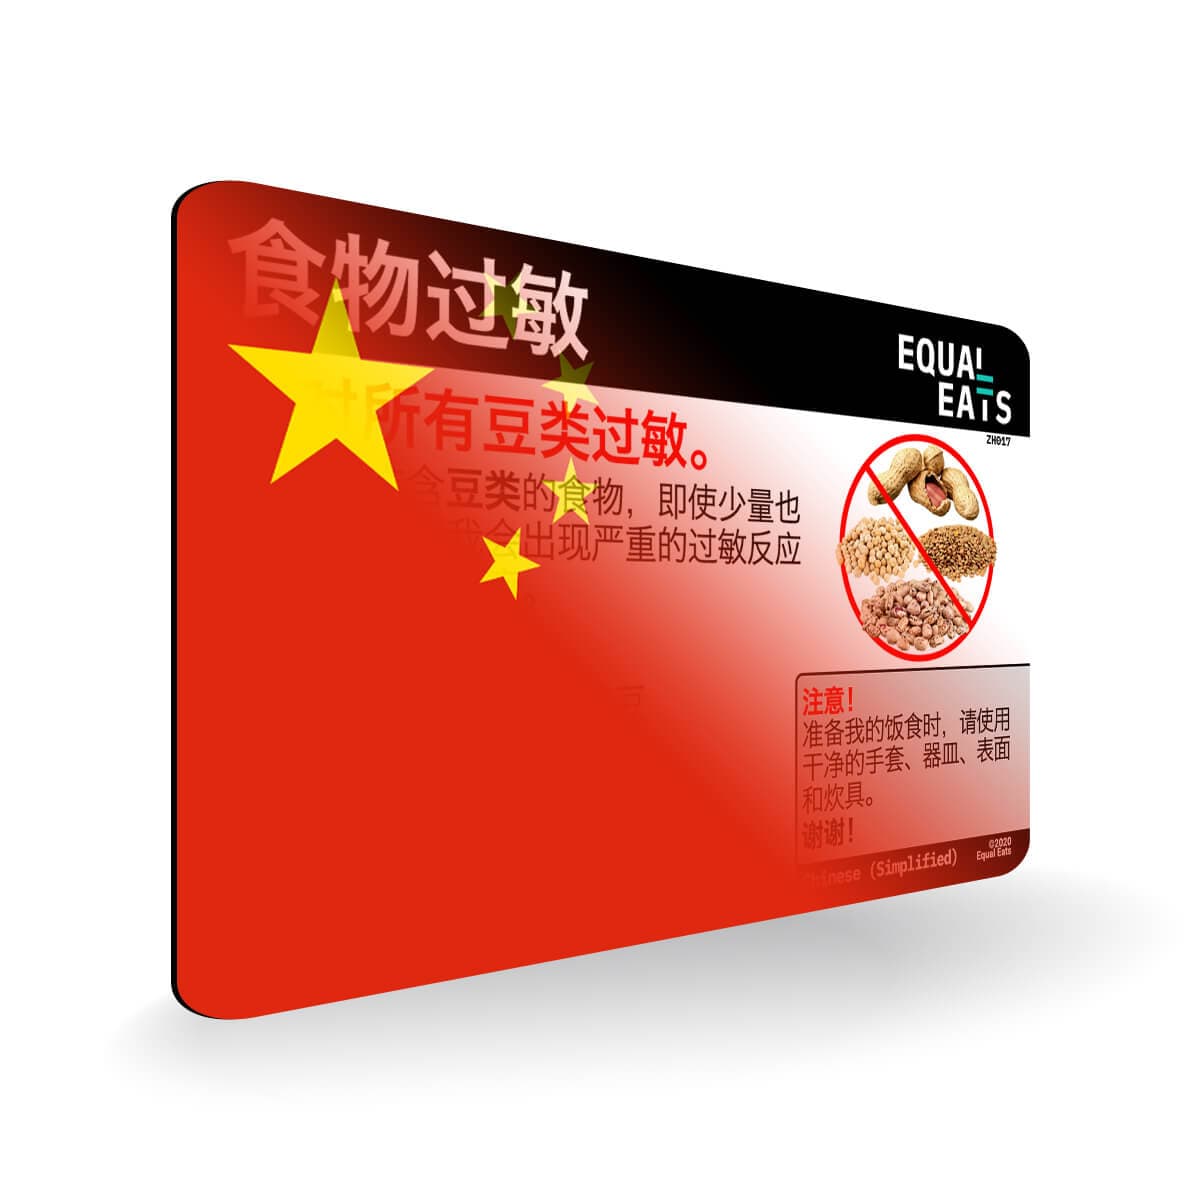 Legume Allergy in Simplified Chinese. Legume Allergy Card for China